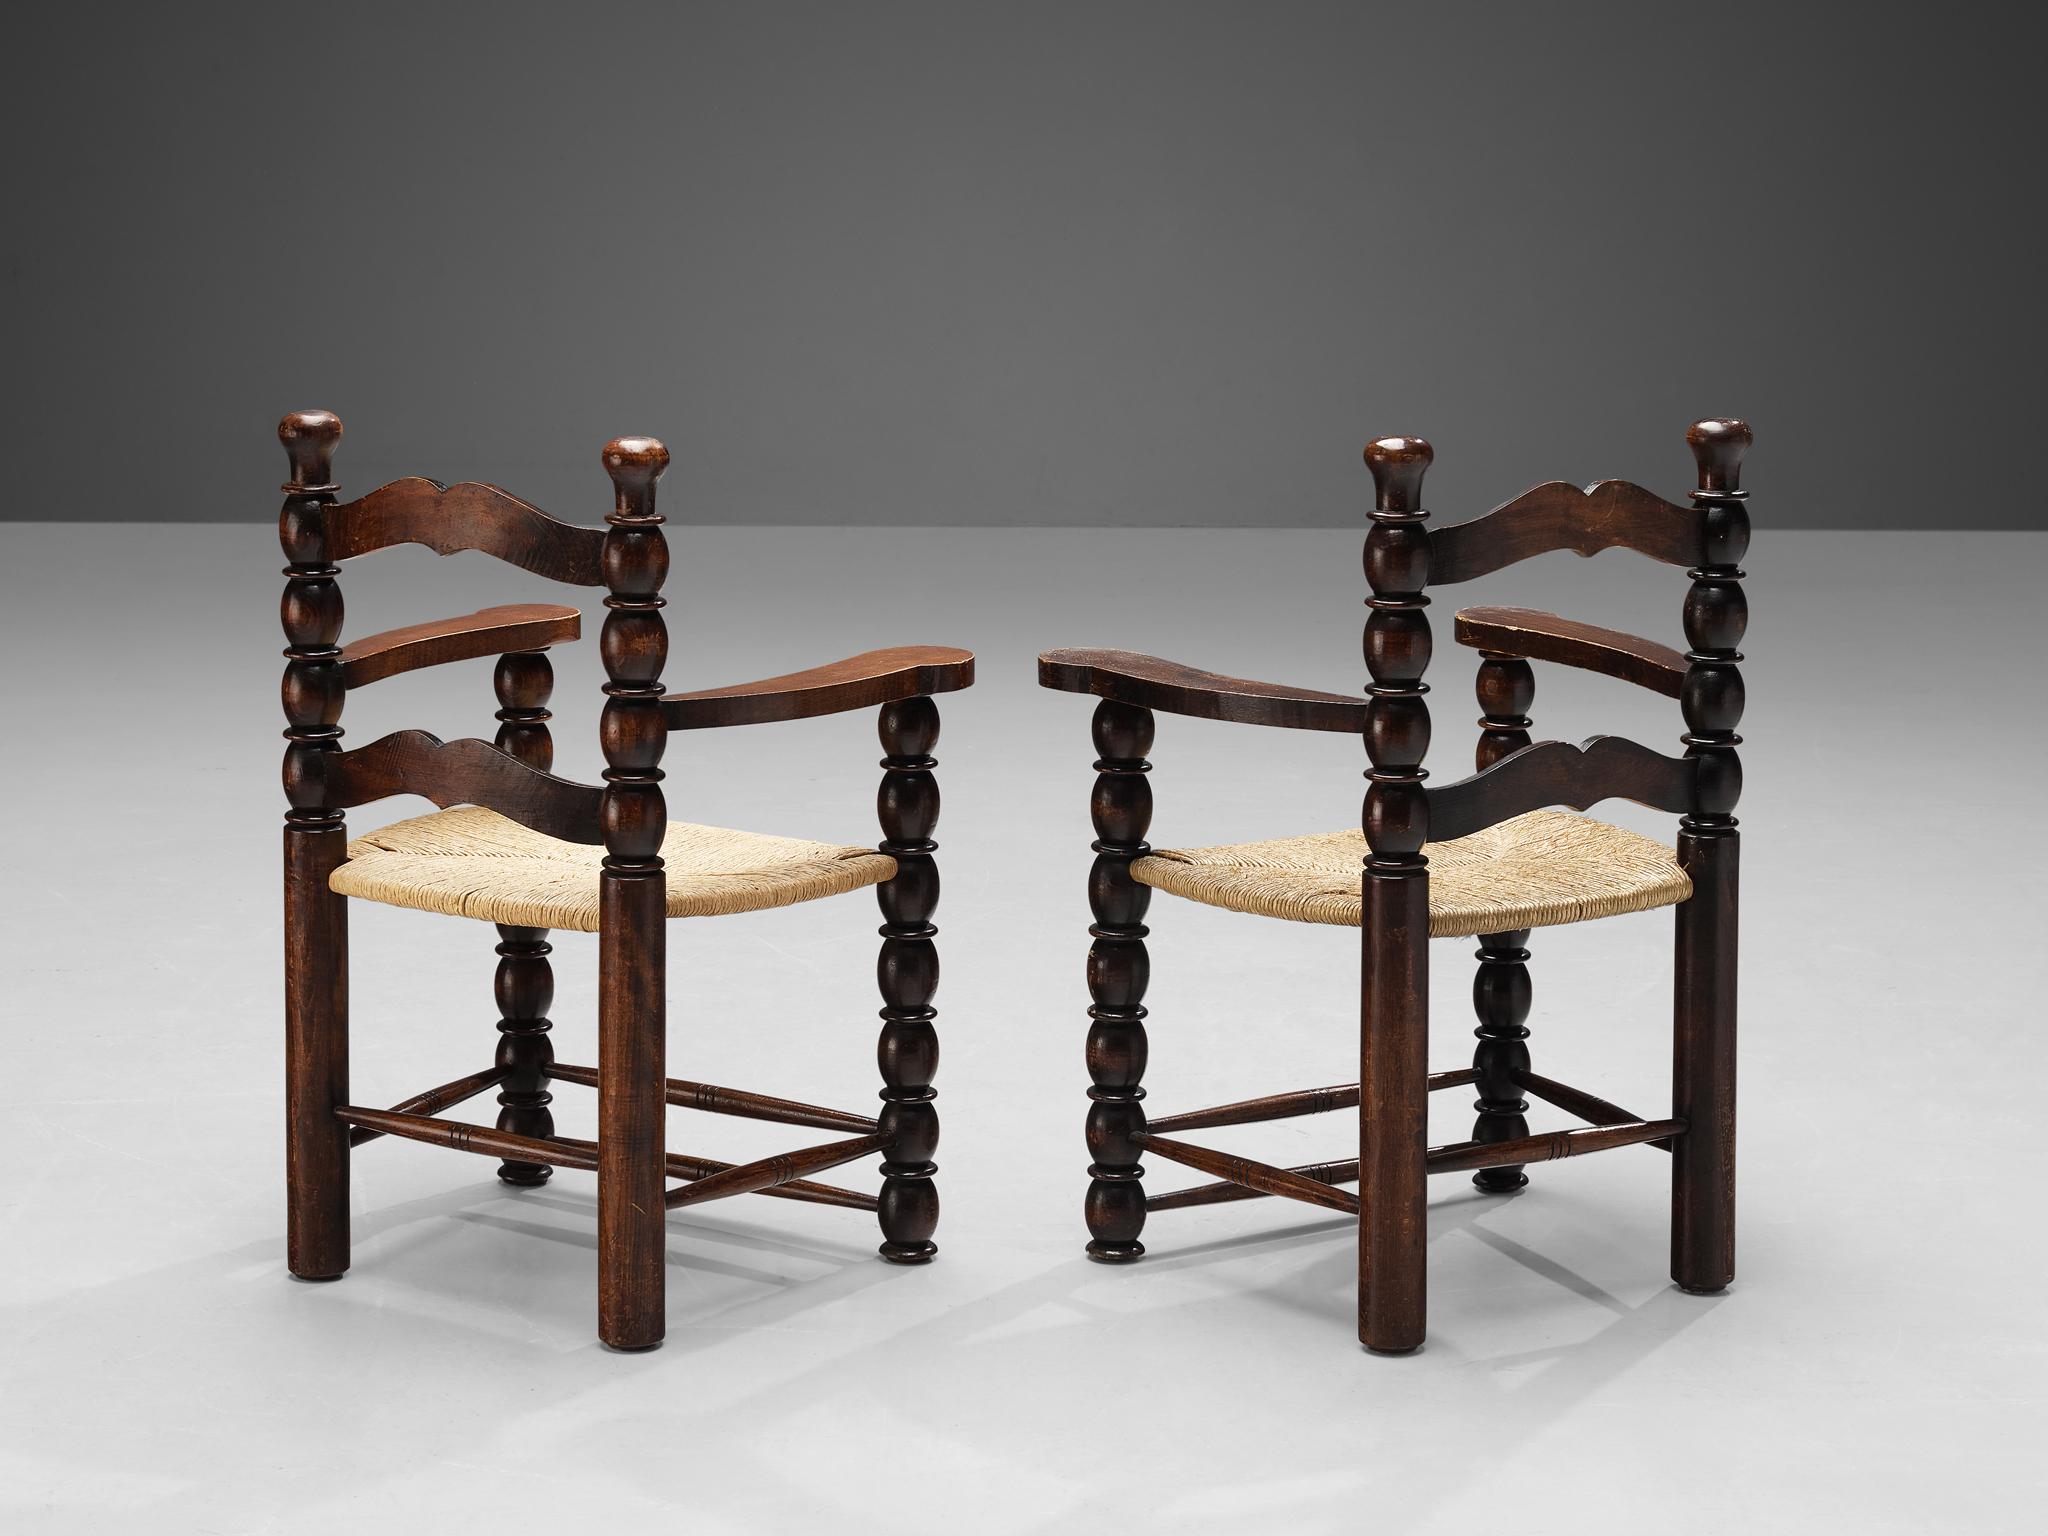 Pair of armchairs, stained wood, rush, France, 1940s.

Decorative pair of French armchairs. The stained wooden frame has multiple carved details that add up to a complex whole. Carved lines and circular ends, straight and round parts come together